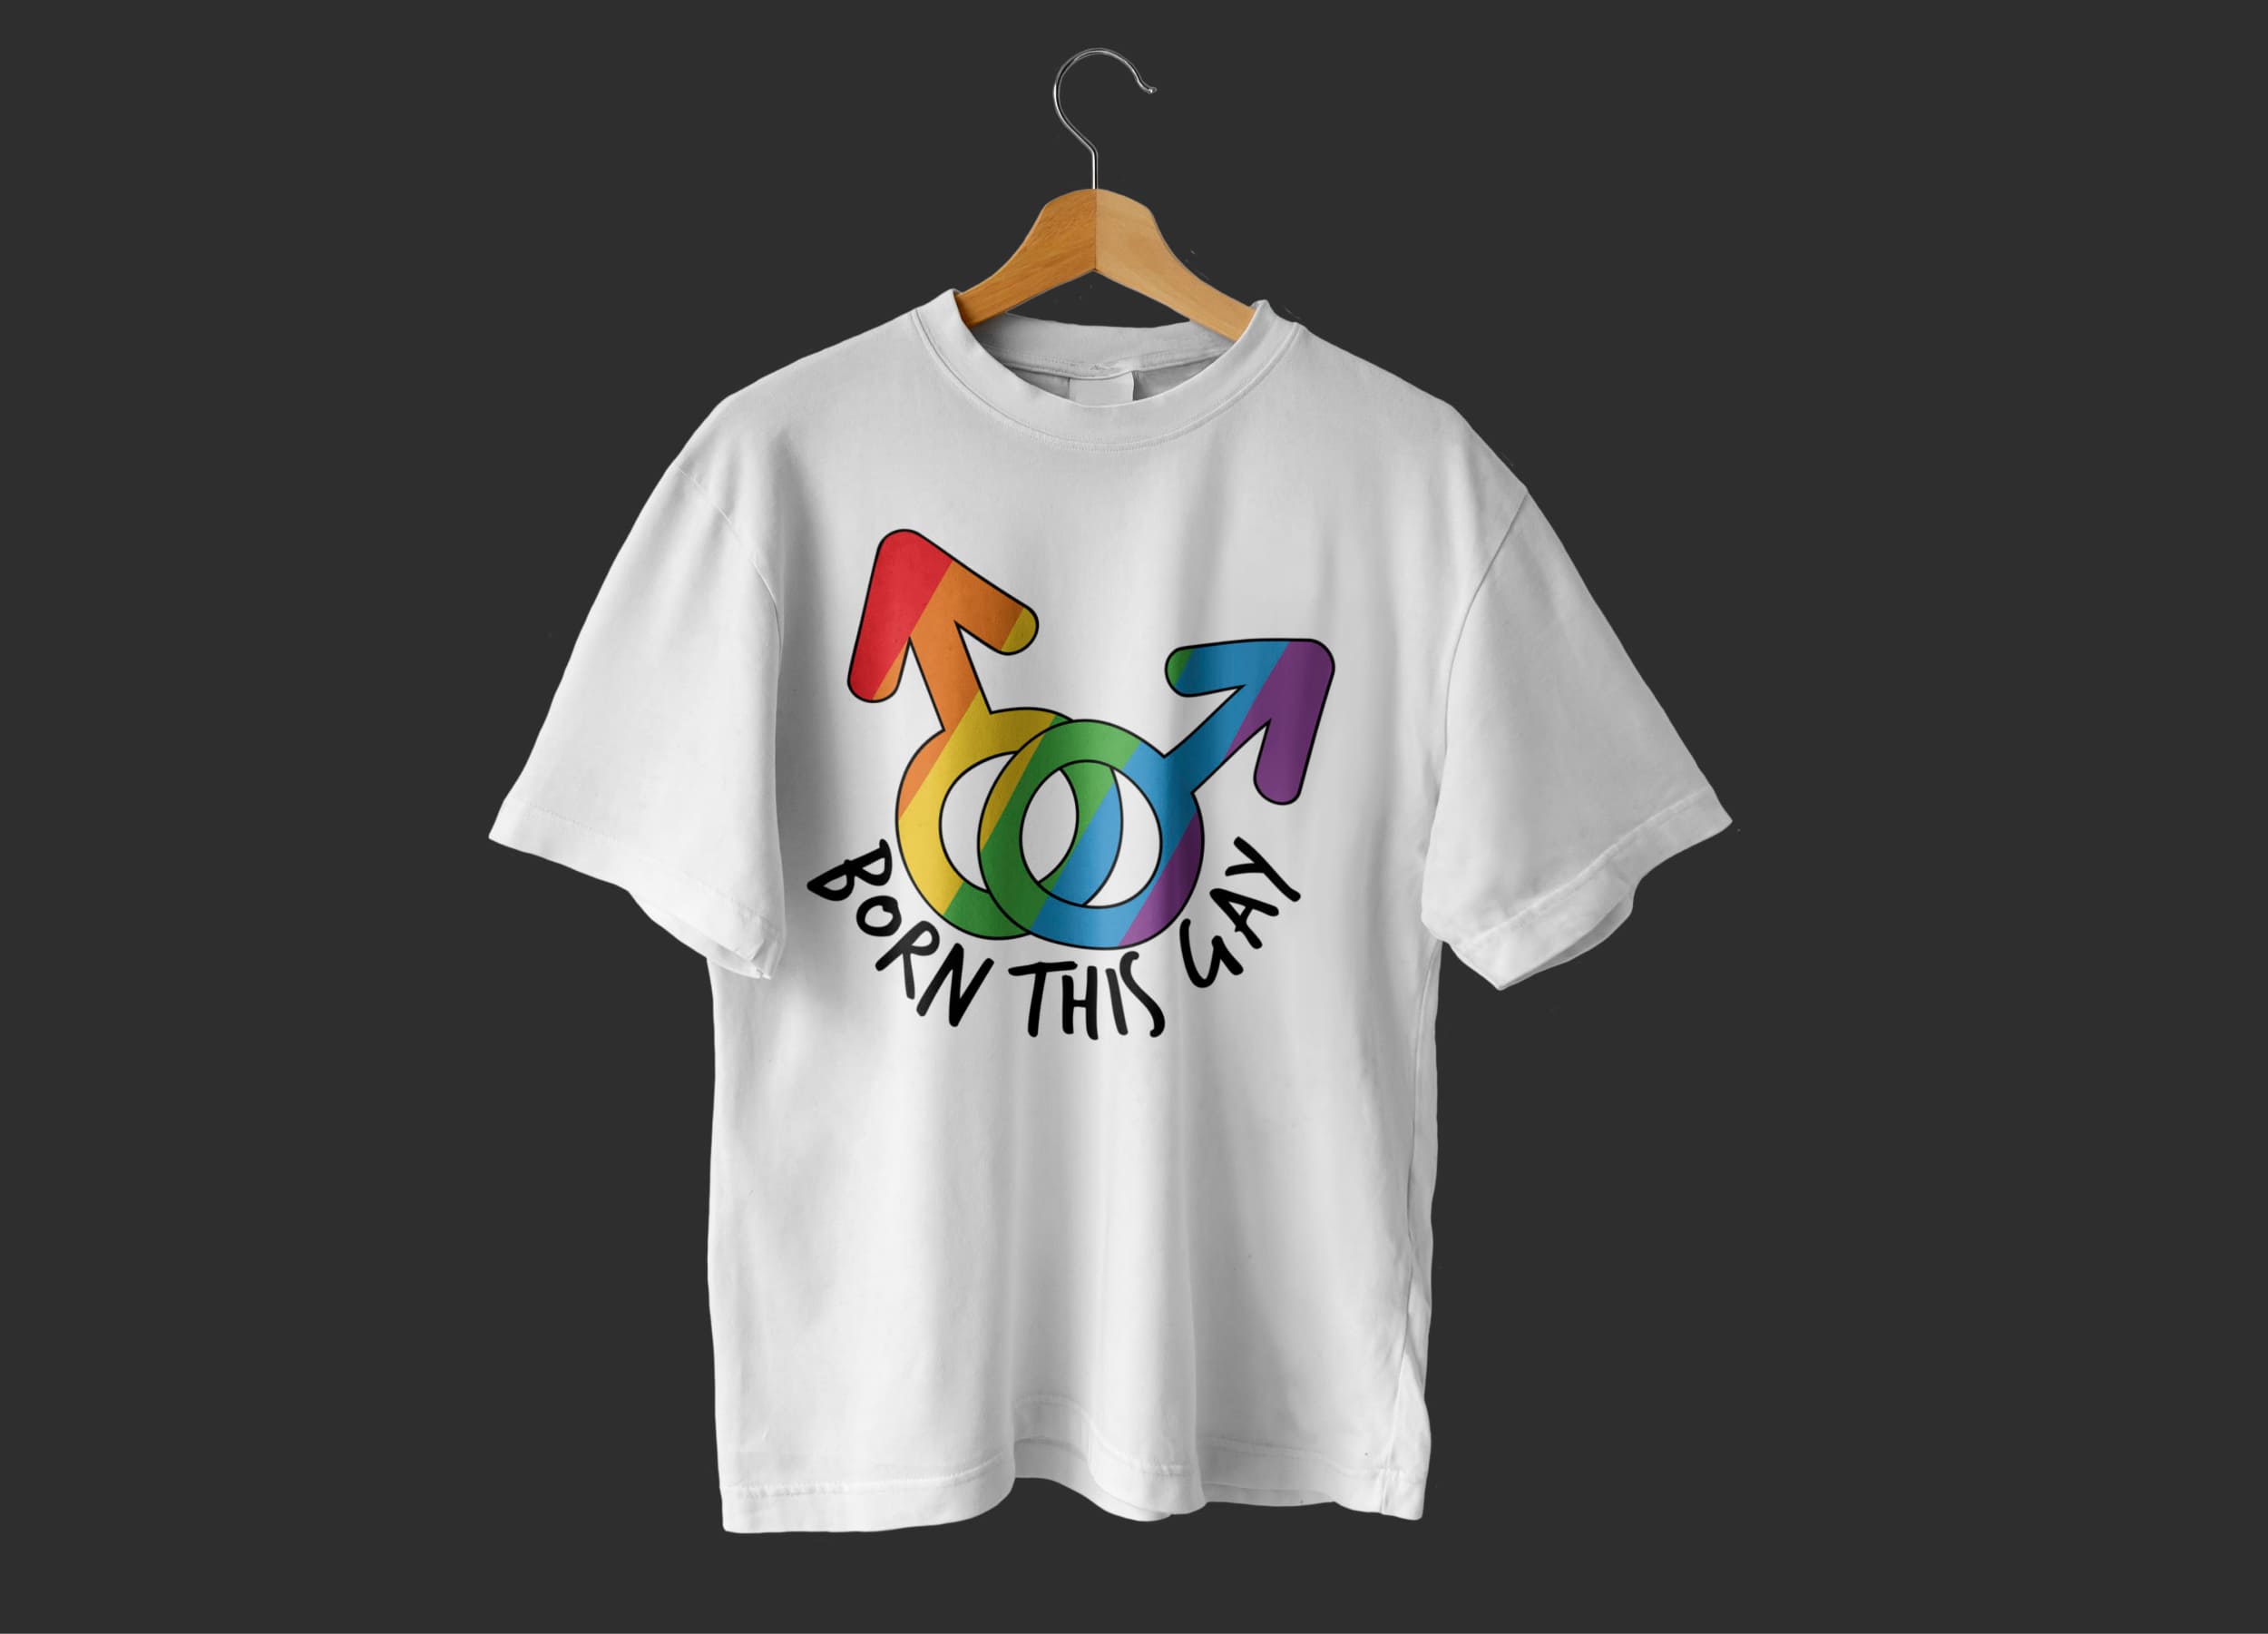 A white t-shirt with two male gender symbols in the colors of the LGBT flag and the black lettering "Born this gay" on a hanger and on a dark gray background.